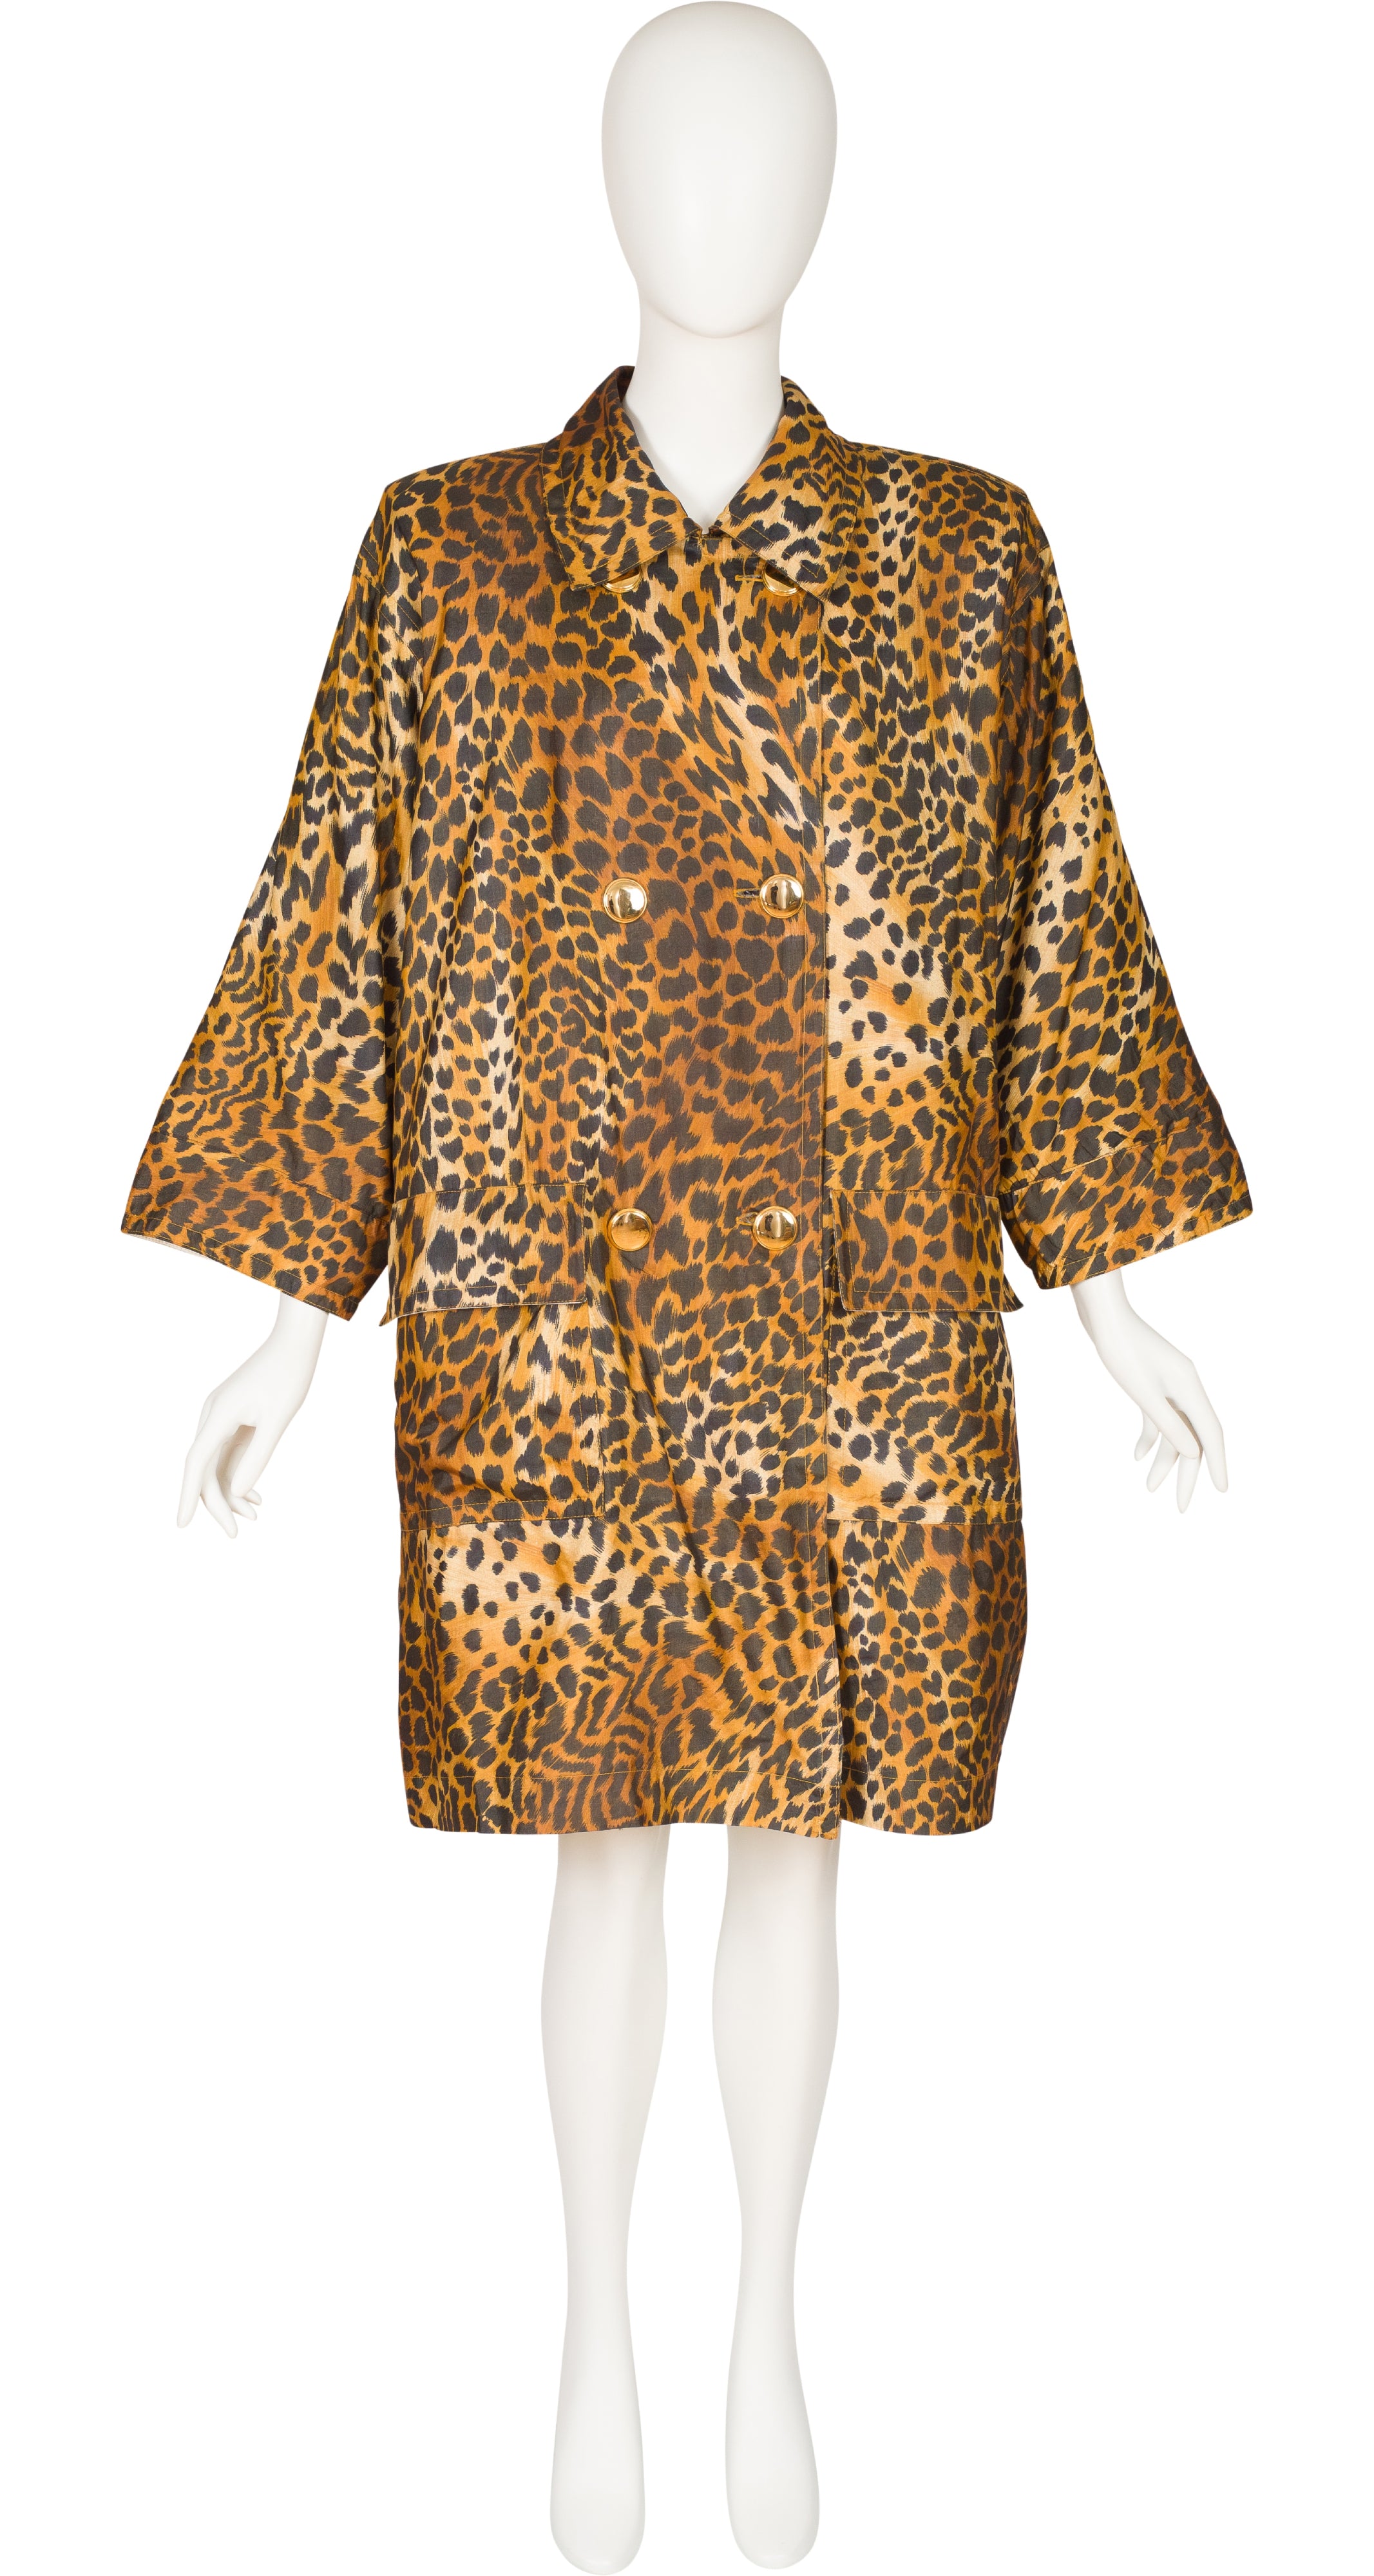 Givenchy 1993 S/S Leopard Print Silk Double-Breasted Rain Coat